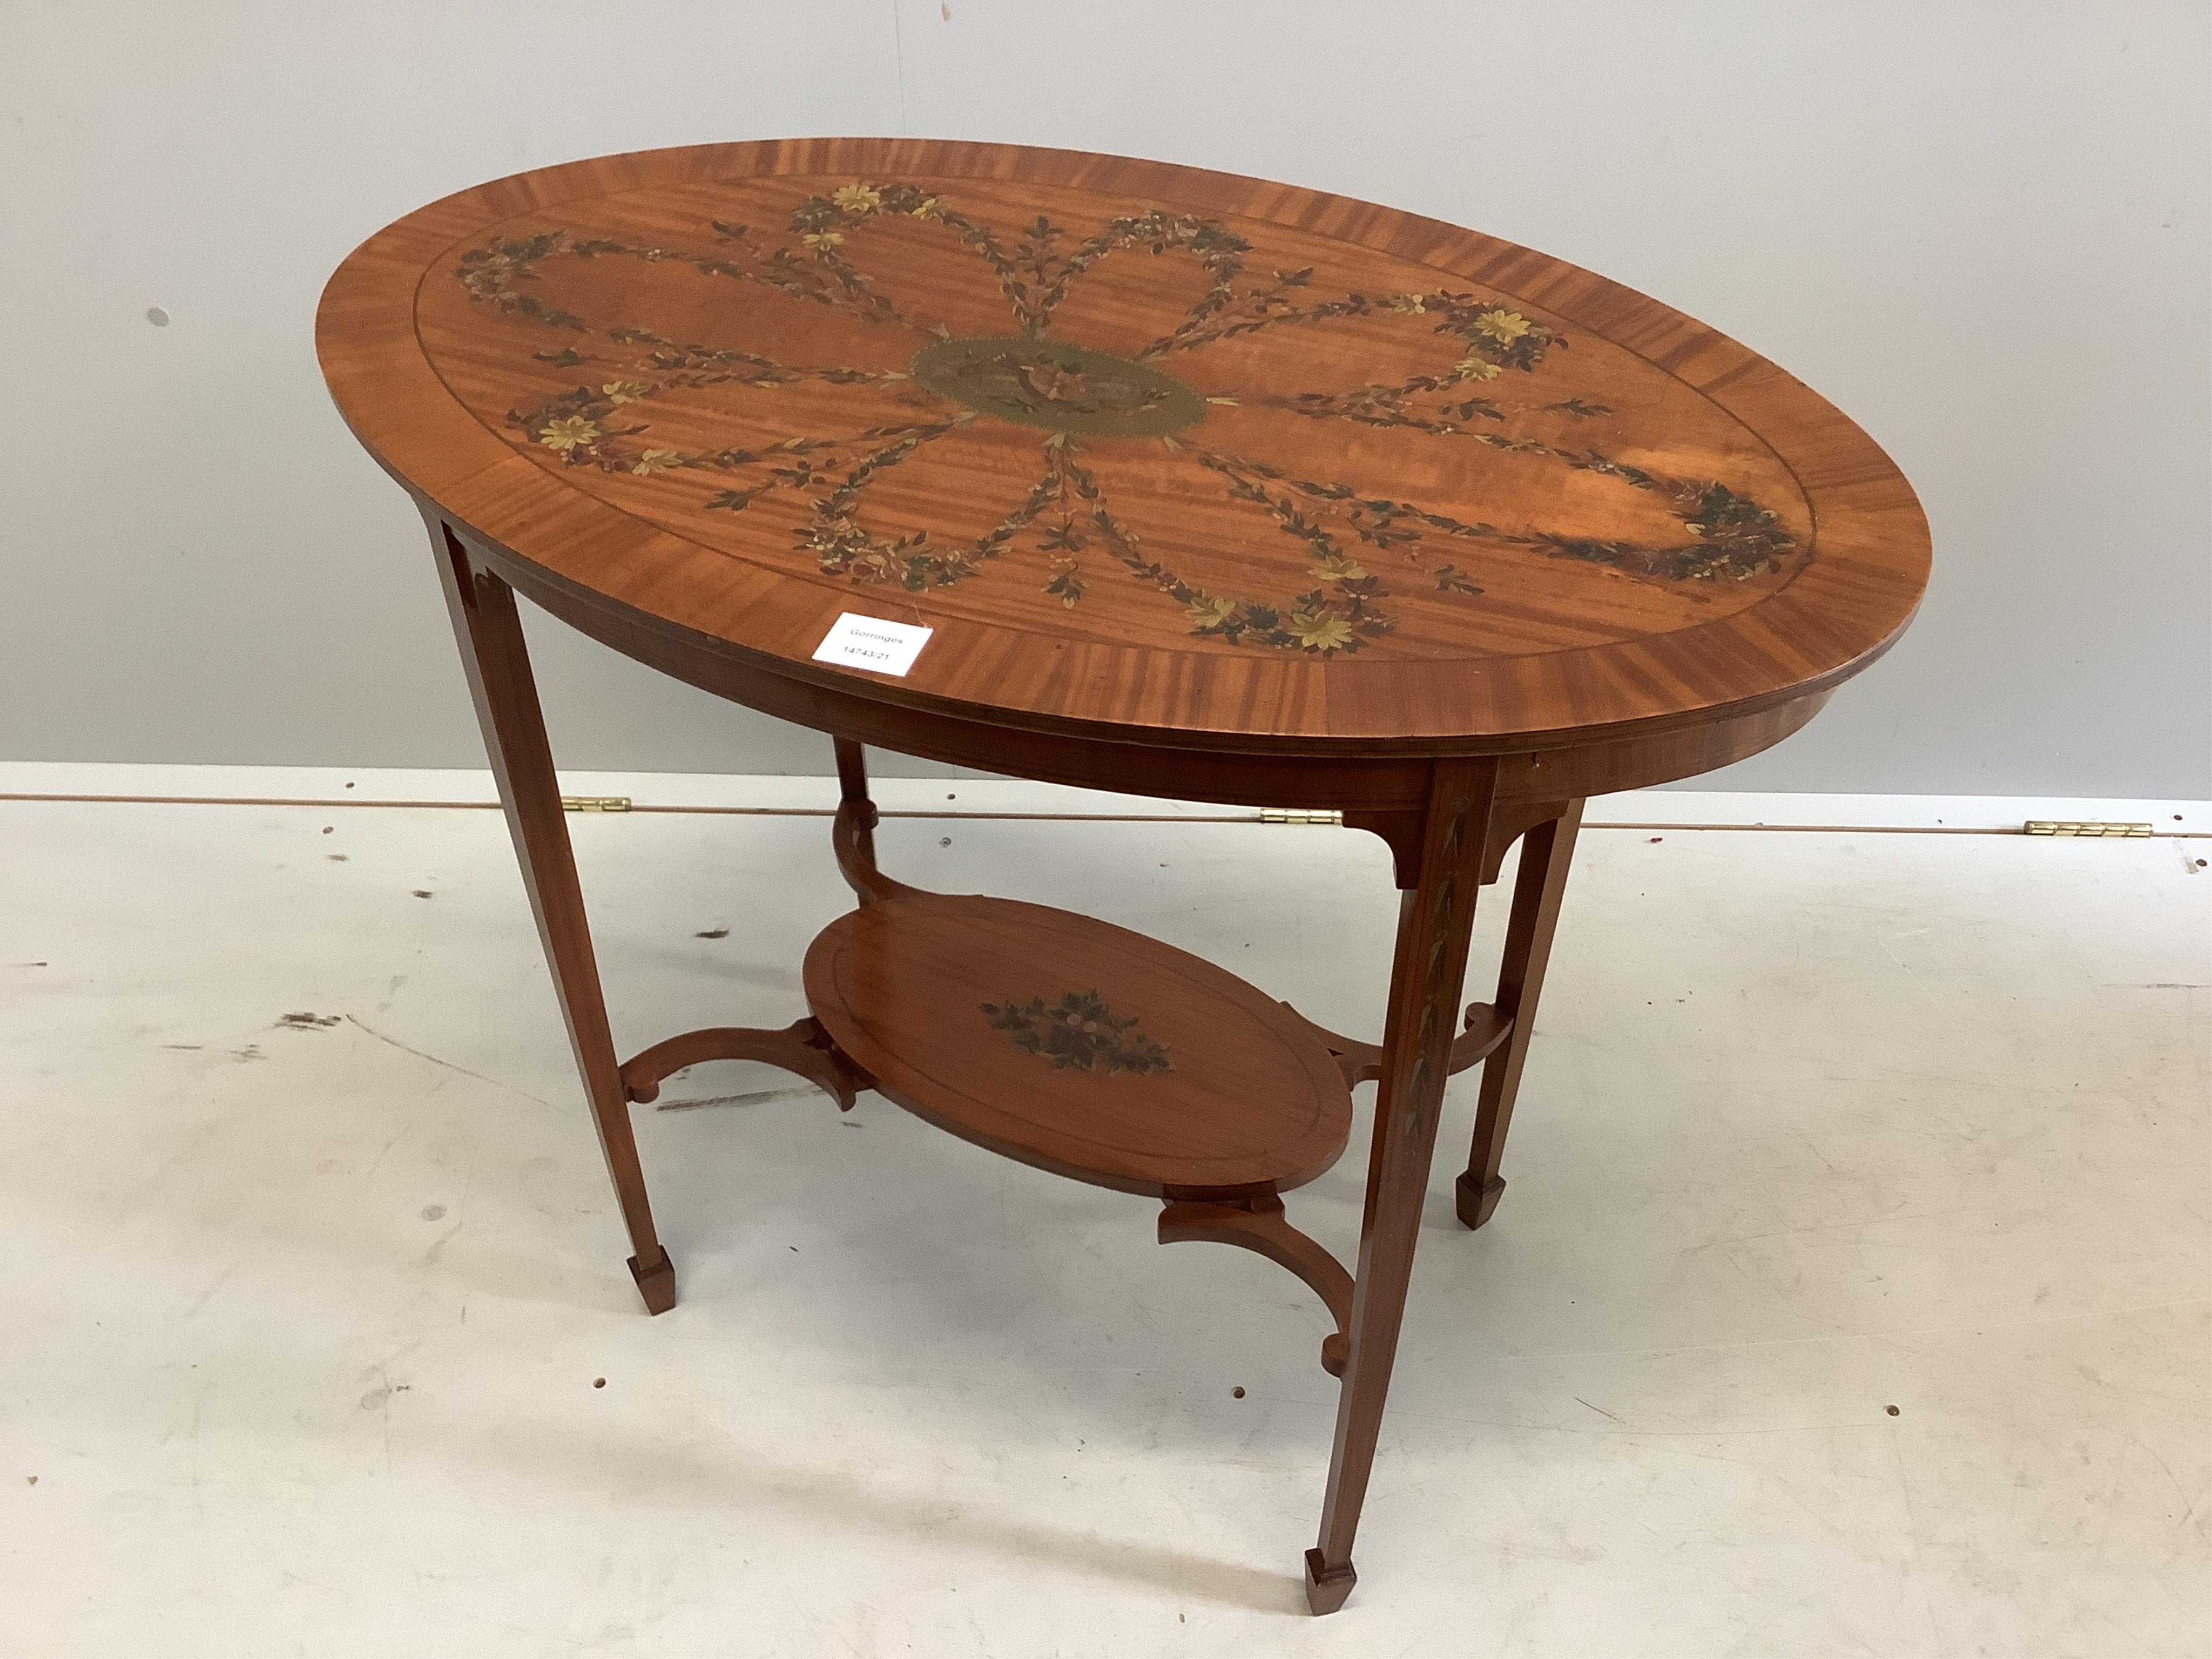 An Edwardian Sheraton Revival oval painted satinwood occasional table, width 81cm, depth 49cm, height 70cm. Condition - fair